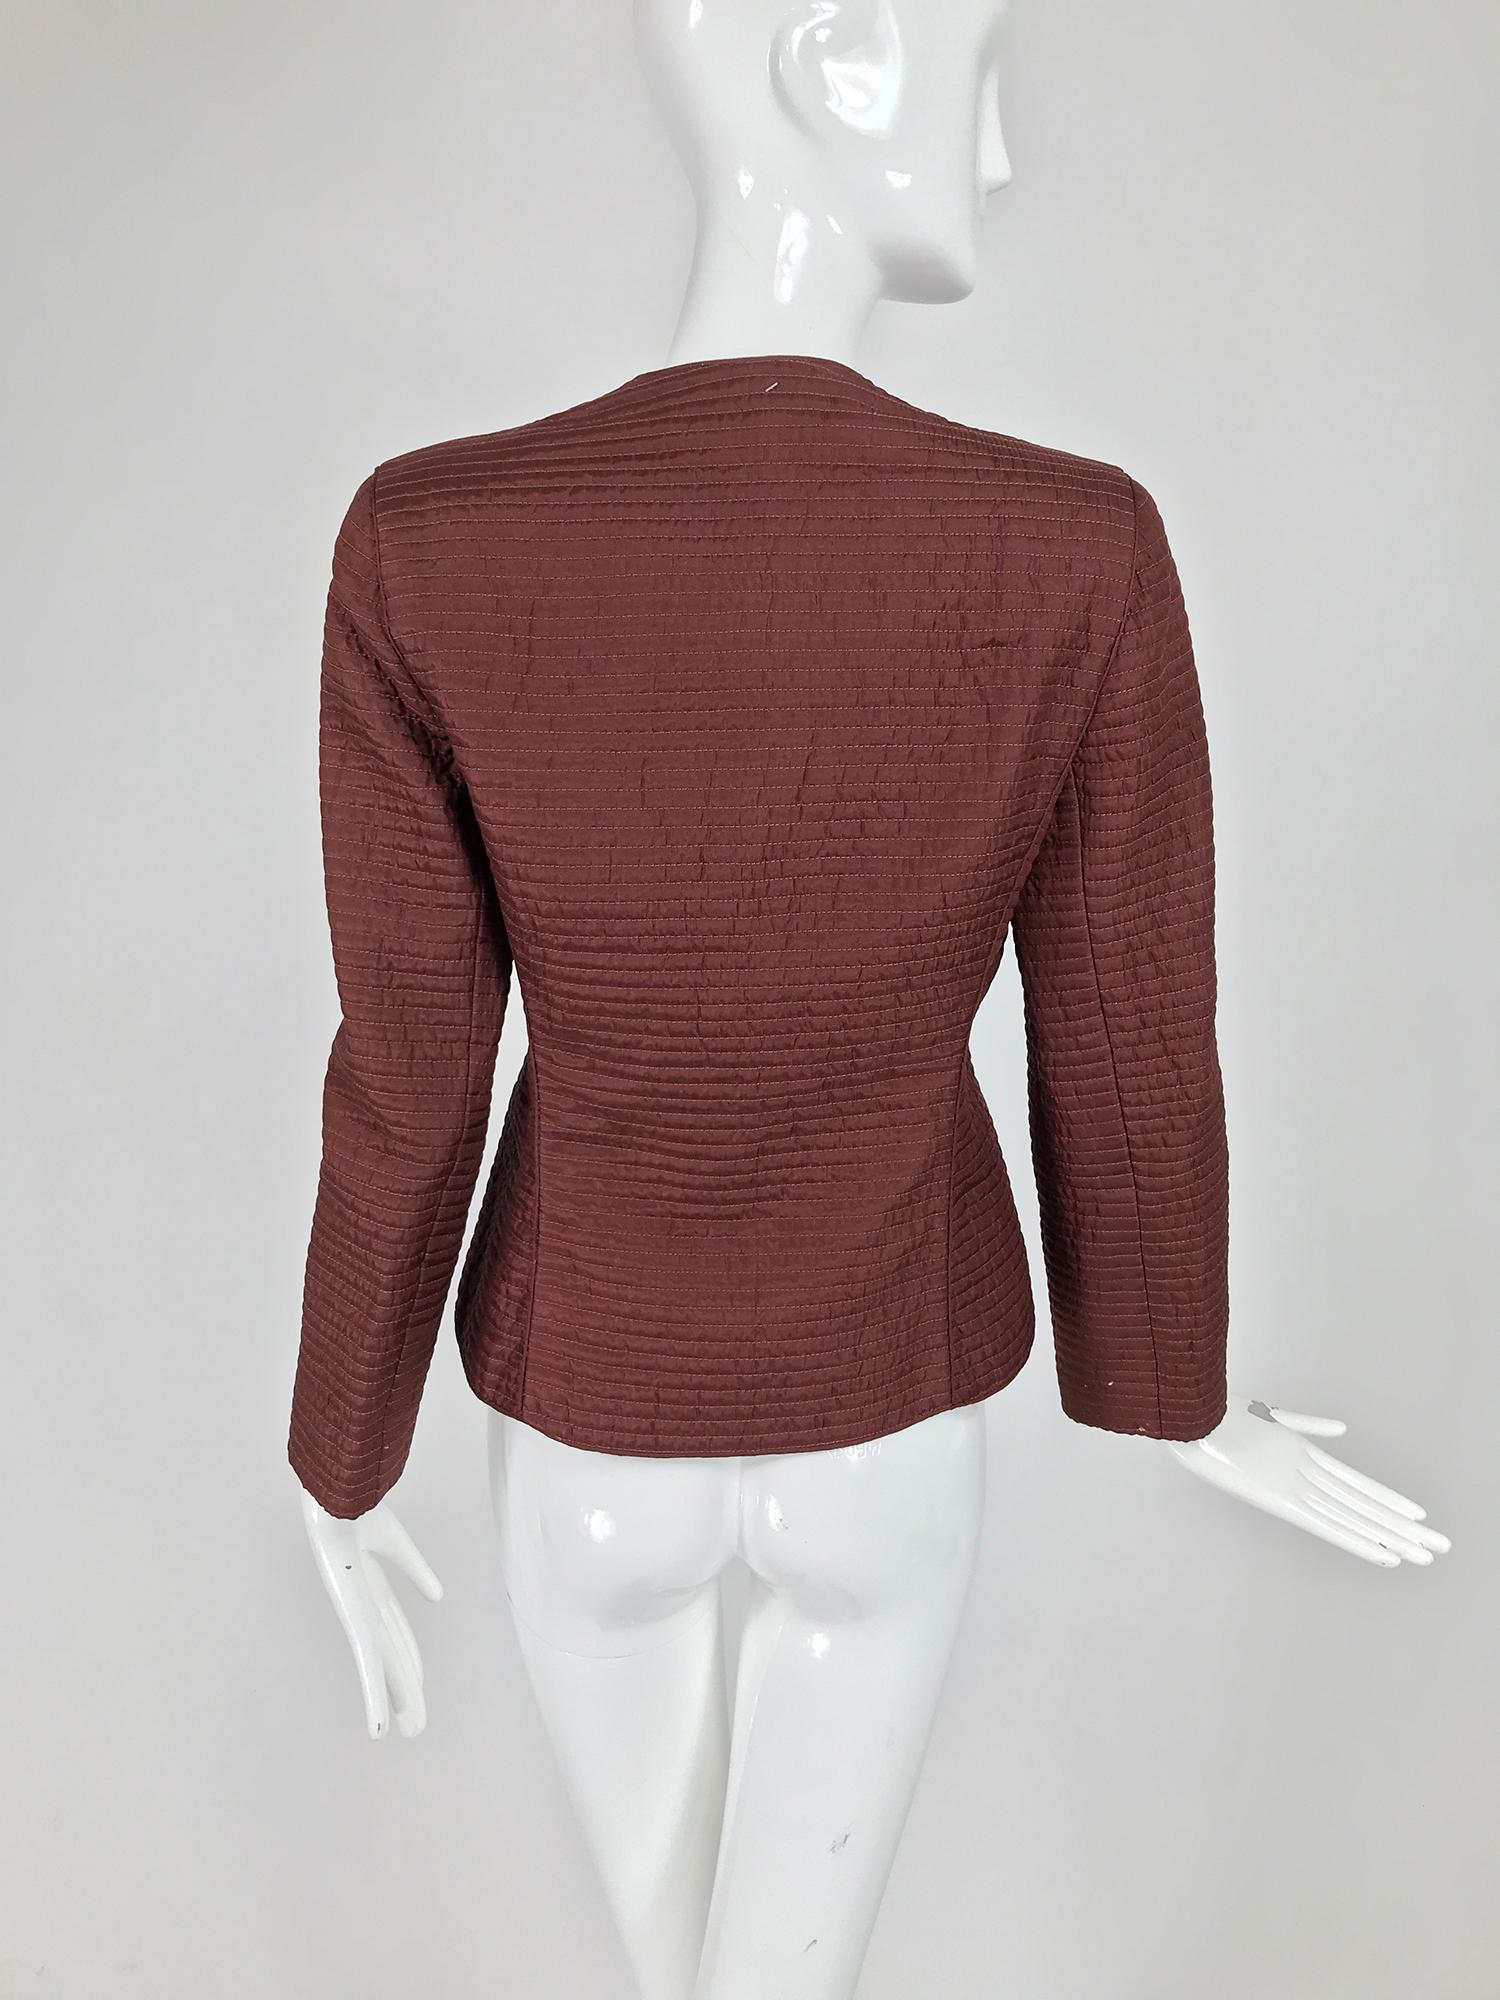 Mary McFadden Quilted Jacket in Rich Raisin Brown 1970s 3